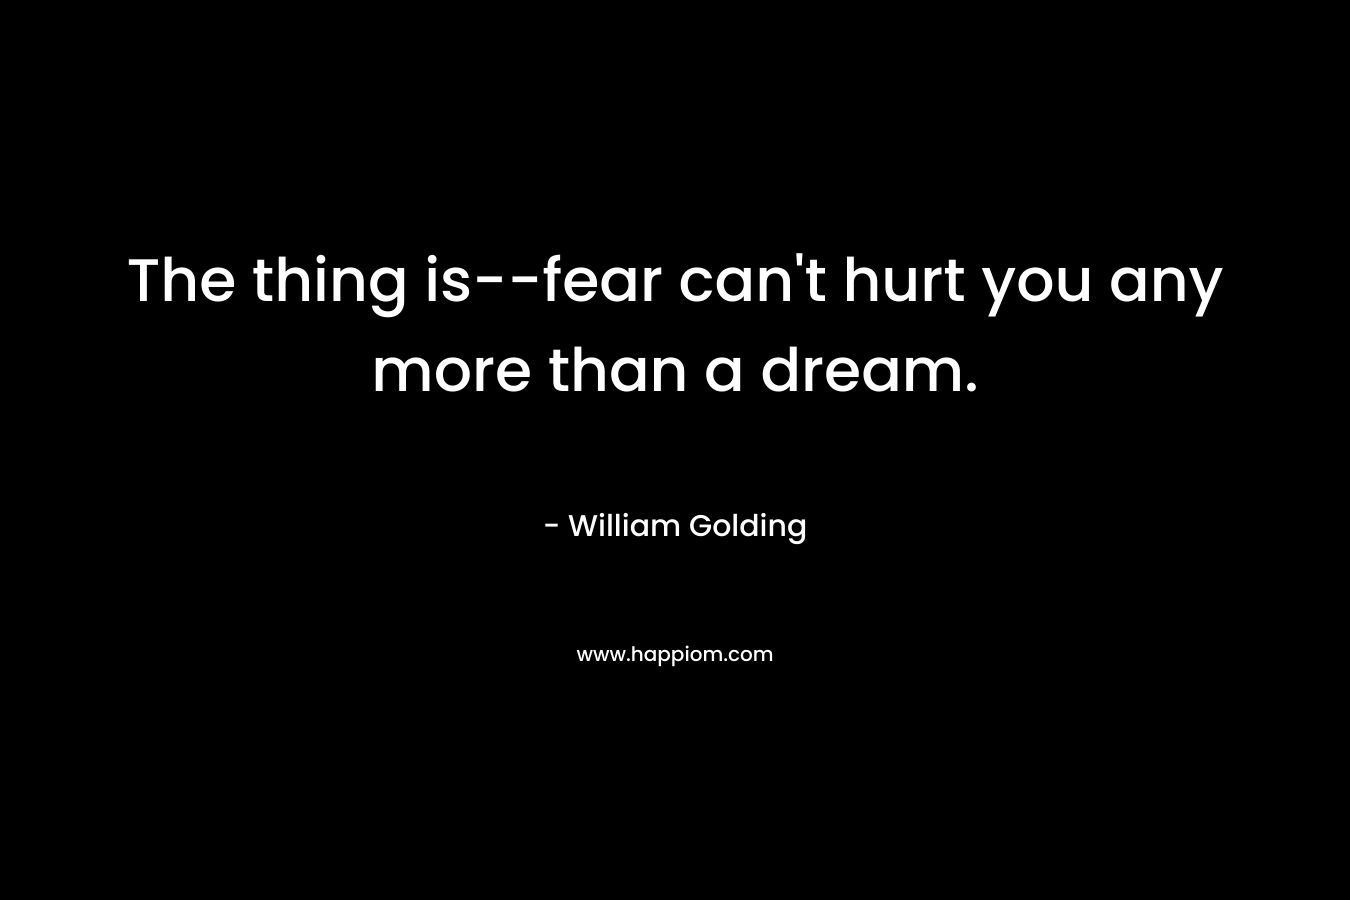 The thing is--fear can't hurt you any more than a dream.